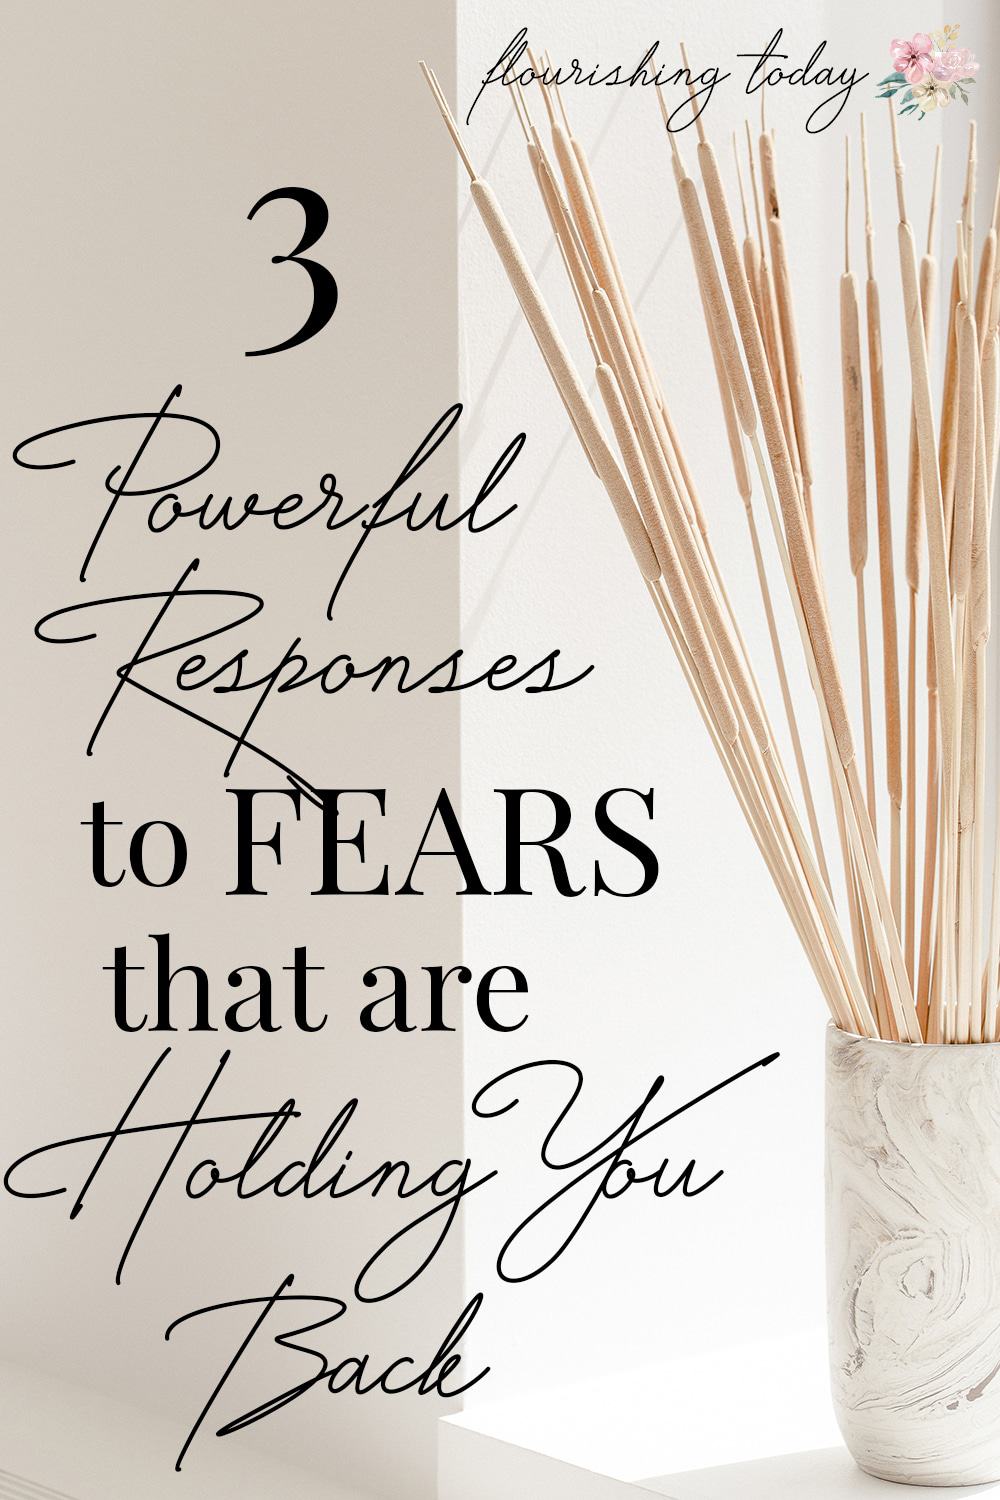 Are you having a hard time pushing past your fears? Here's a few tips on how to get over fears that are holding you back from God's best for your life! #overcomefear #getoverfear #fear